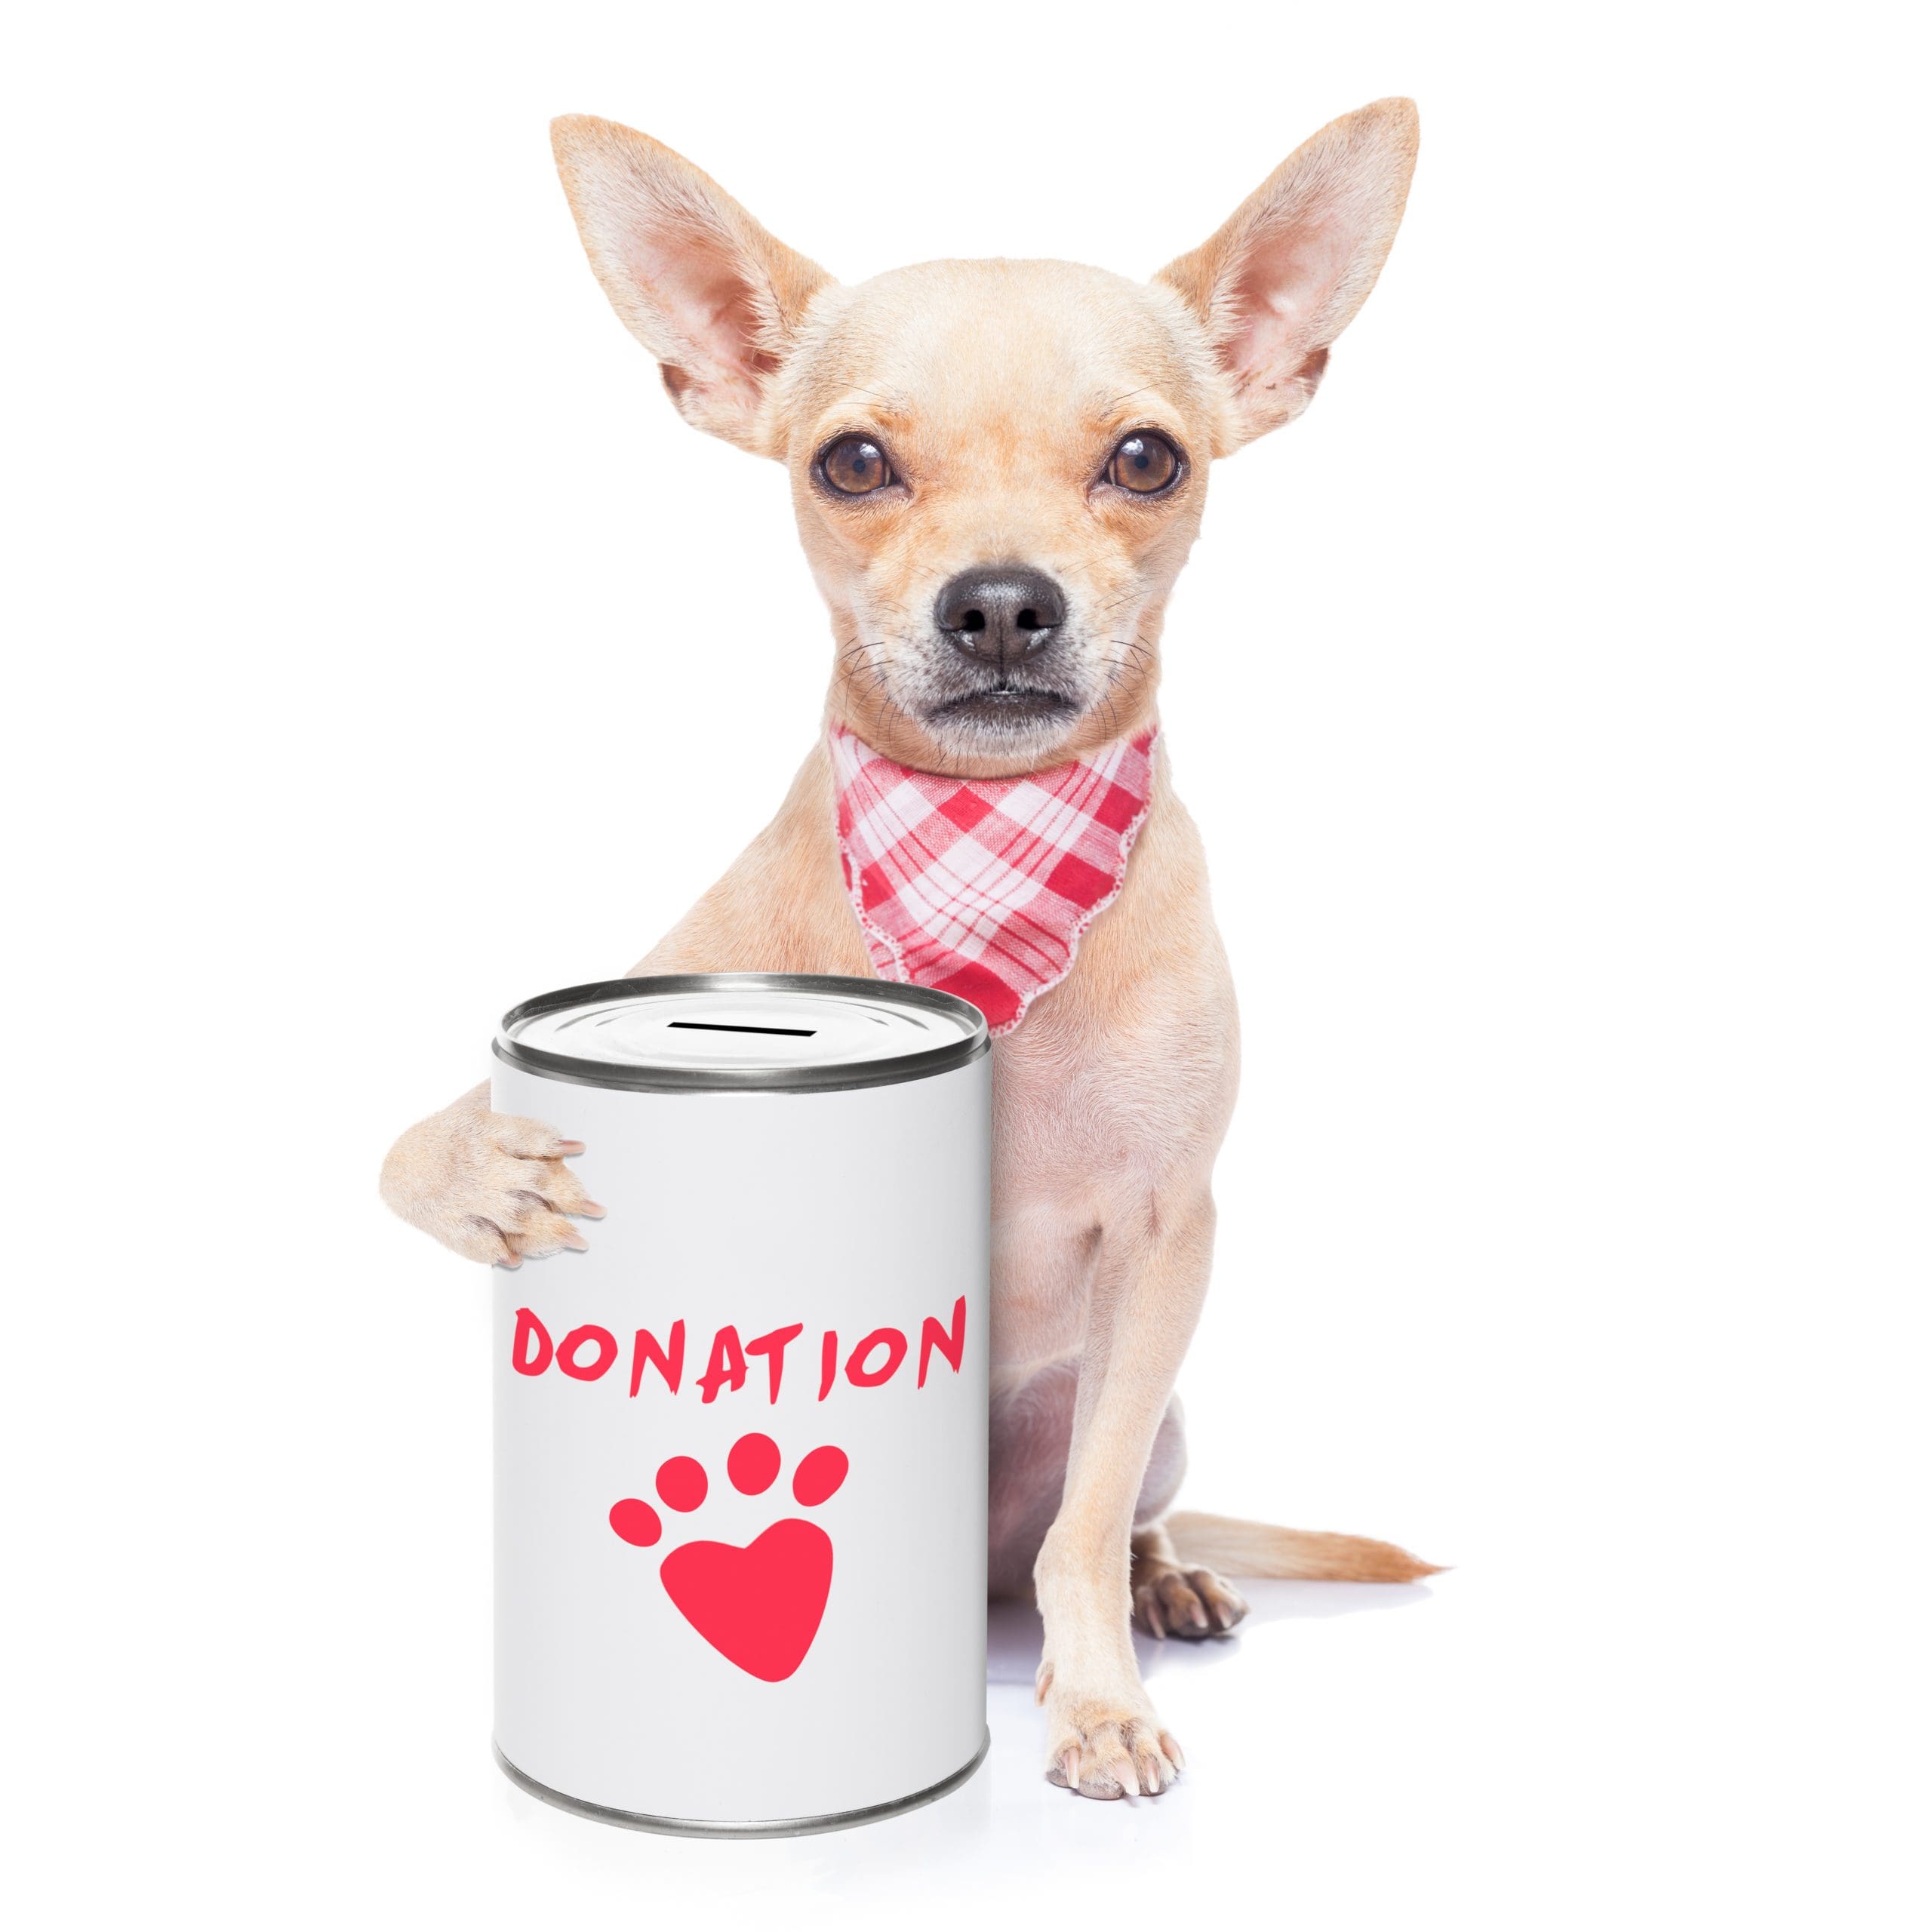 chihuahua dog with a donation can , collecting money for  charity, isolated on white background